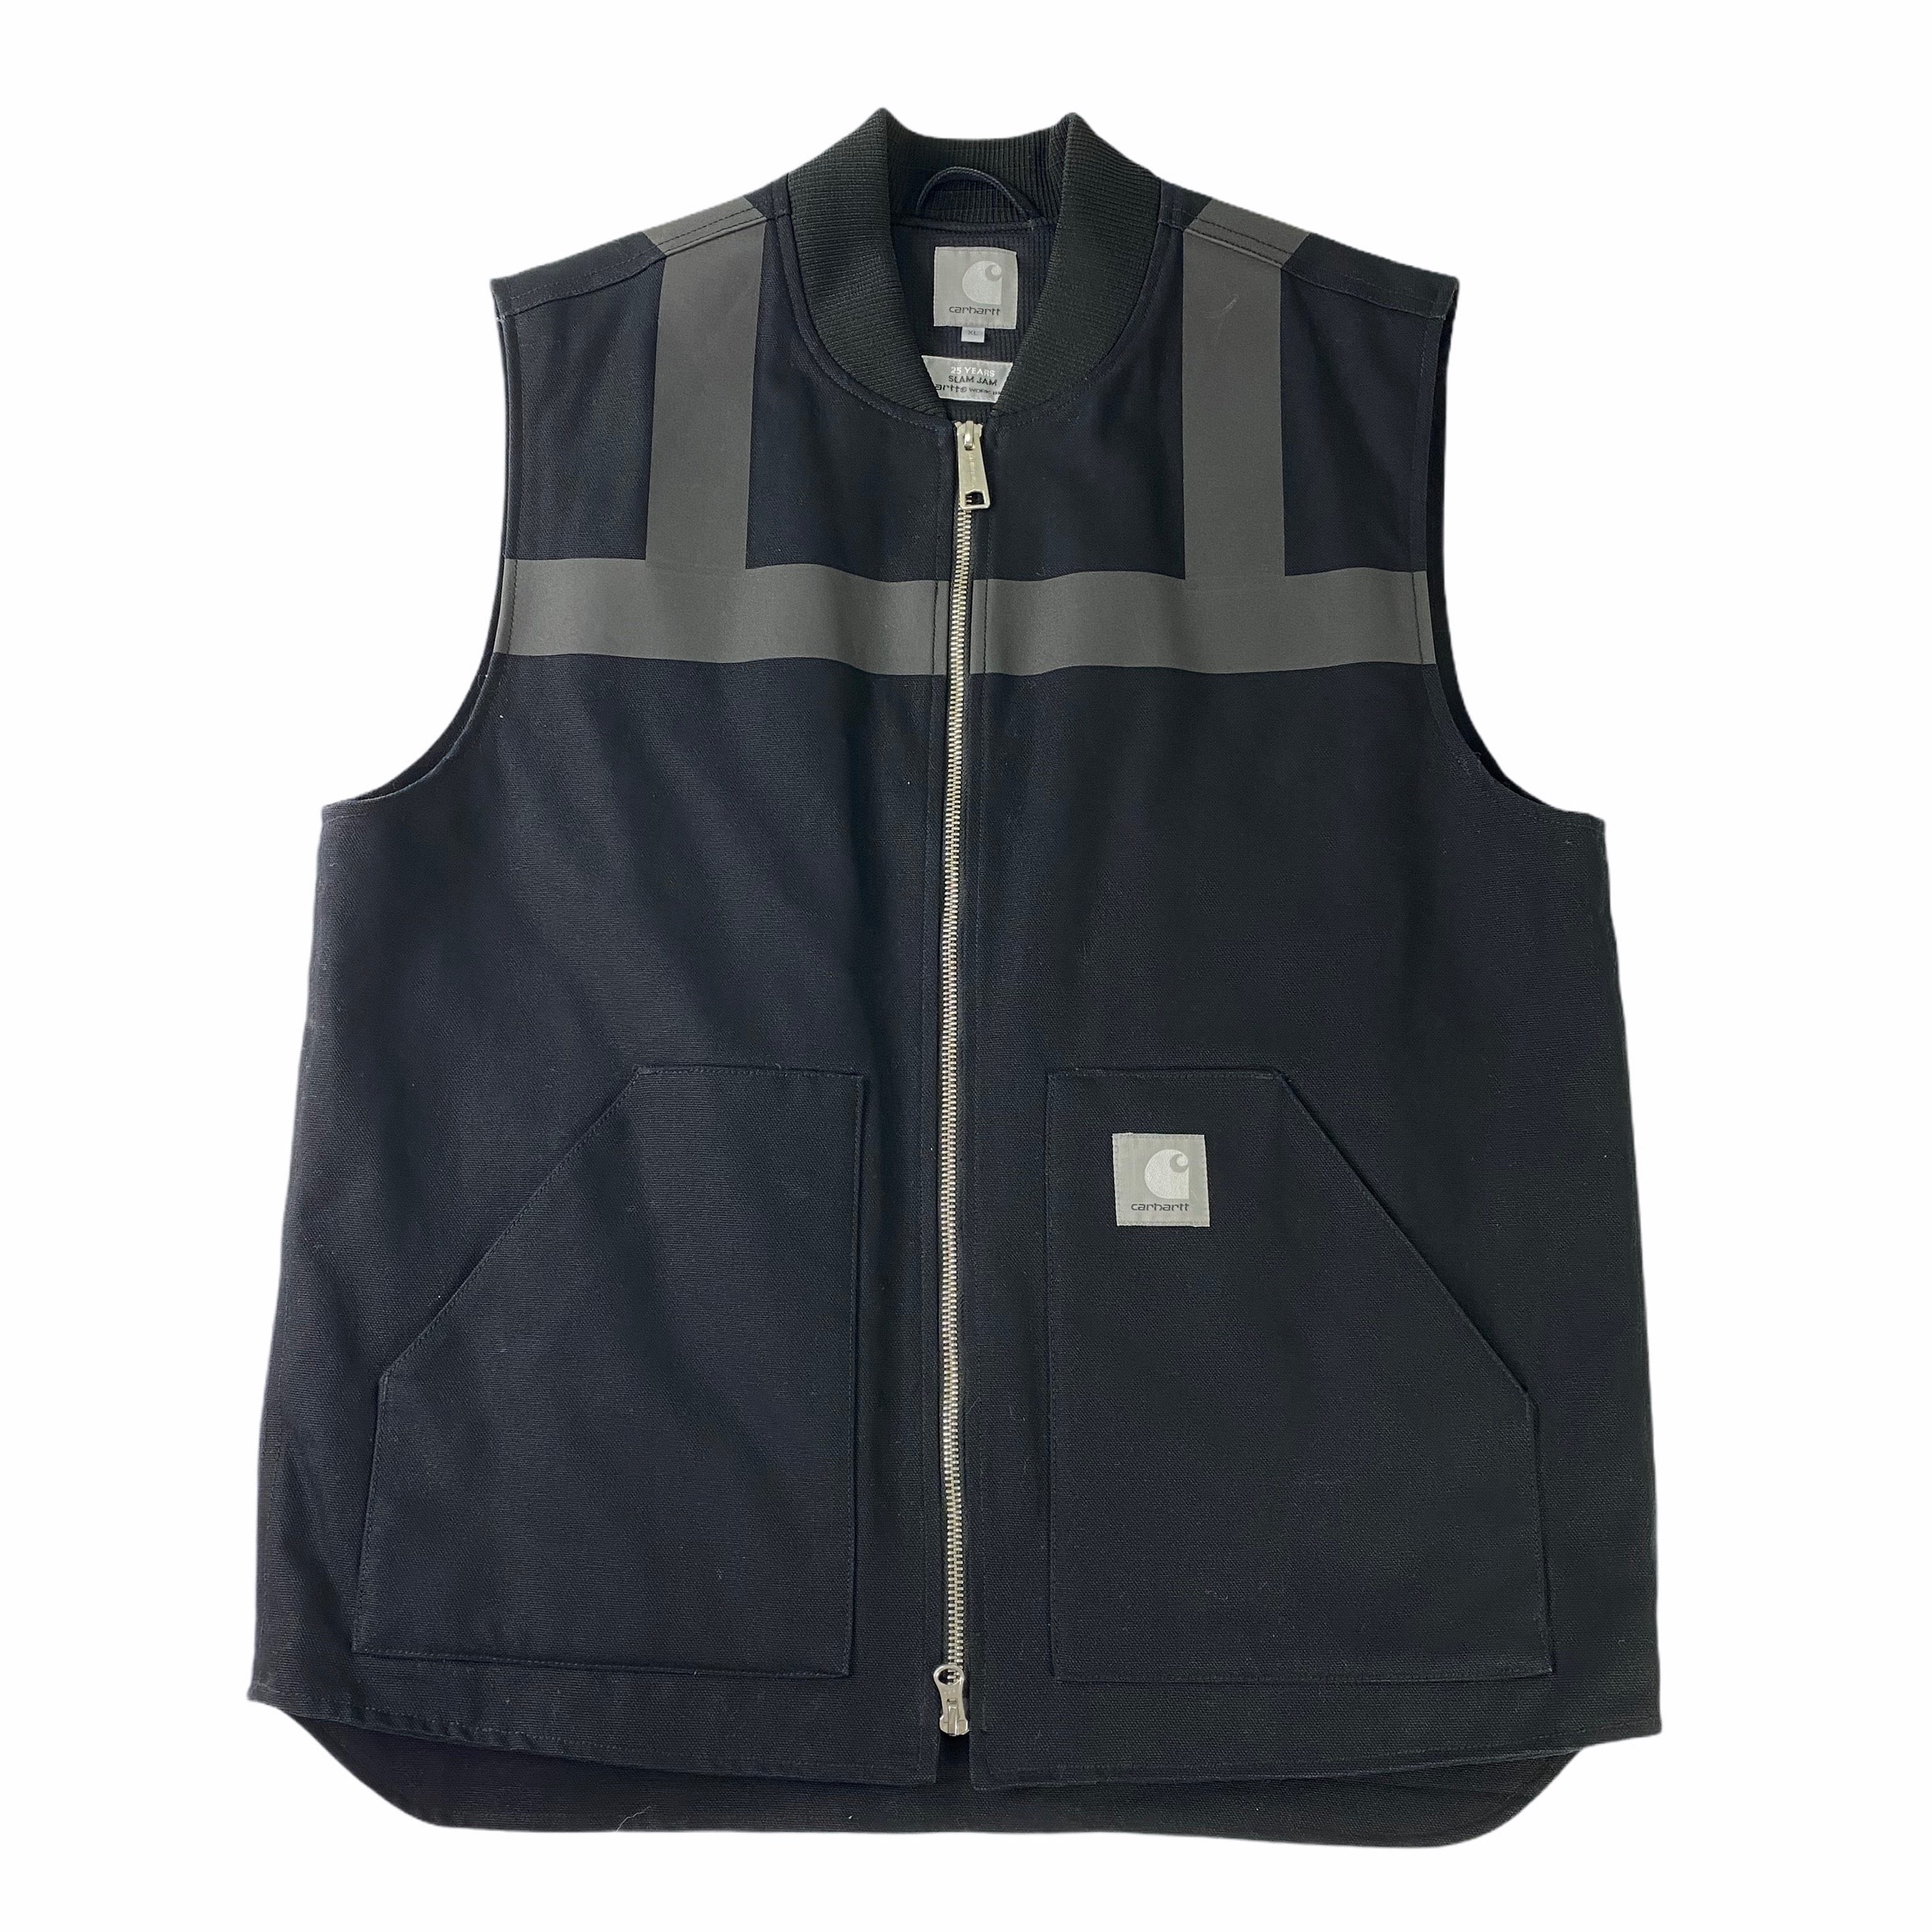 [Carhartt] 25yearts Taping Vest - Size XL